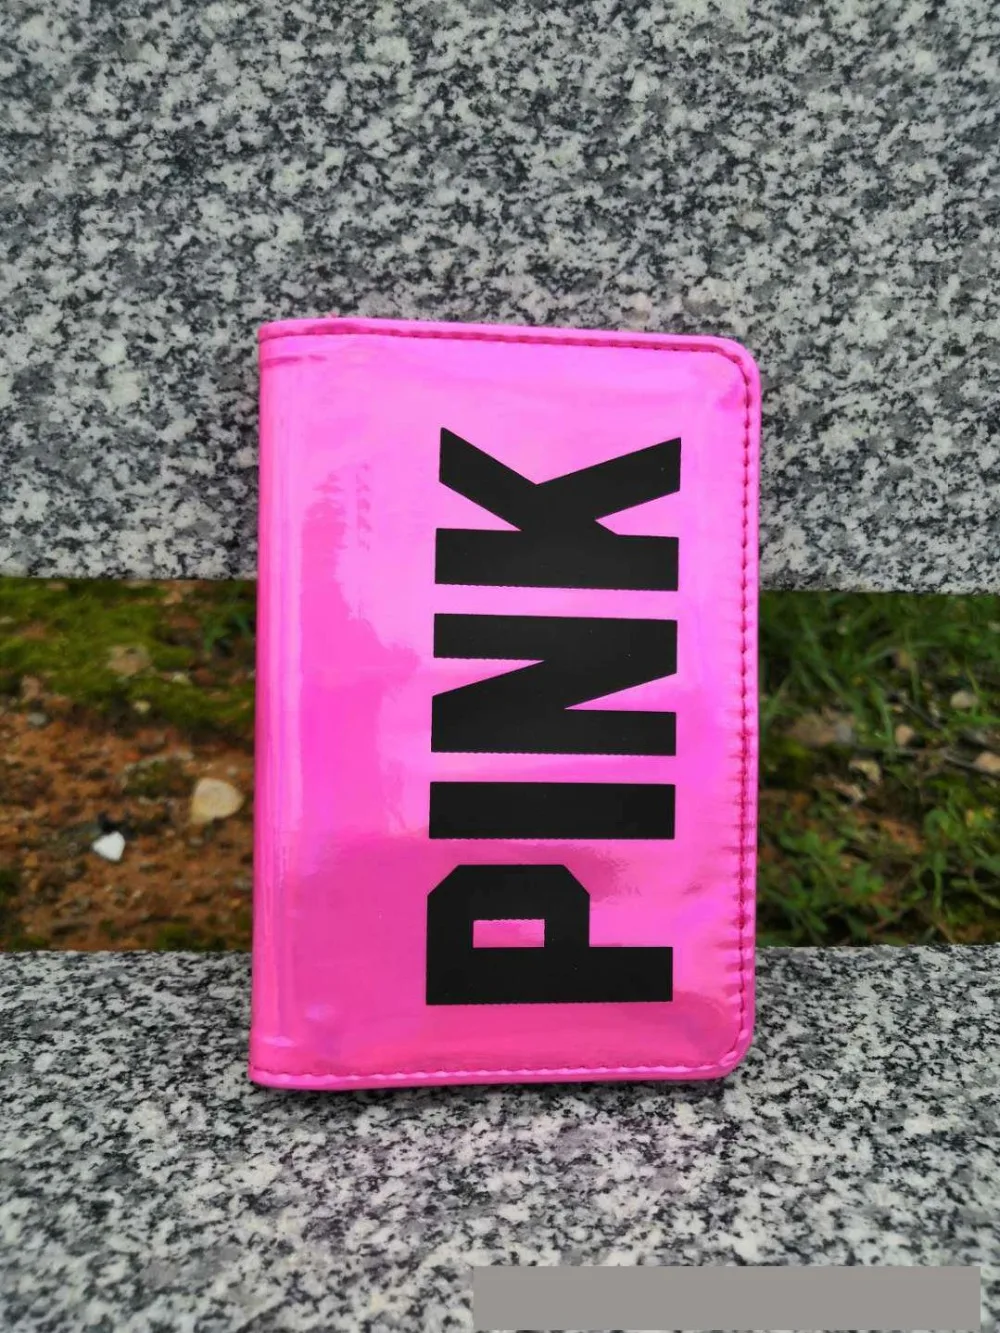 New card protection pink Wallet Bank purse Holder Id Bank Card Case Protection Credit Card Holder rfid wallet